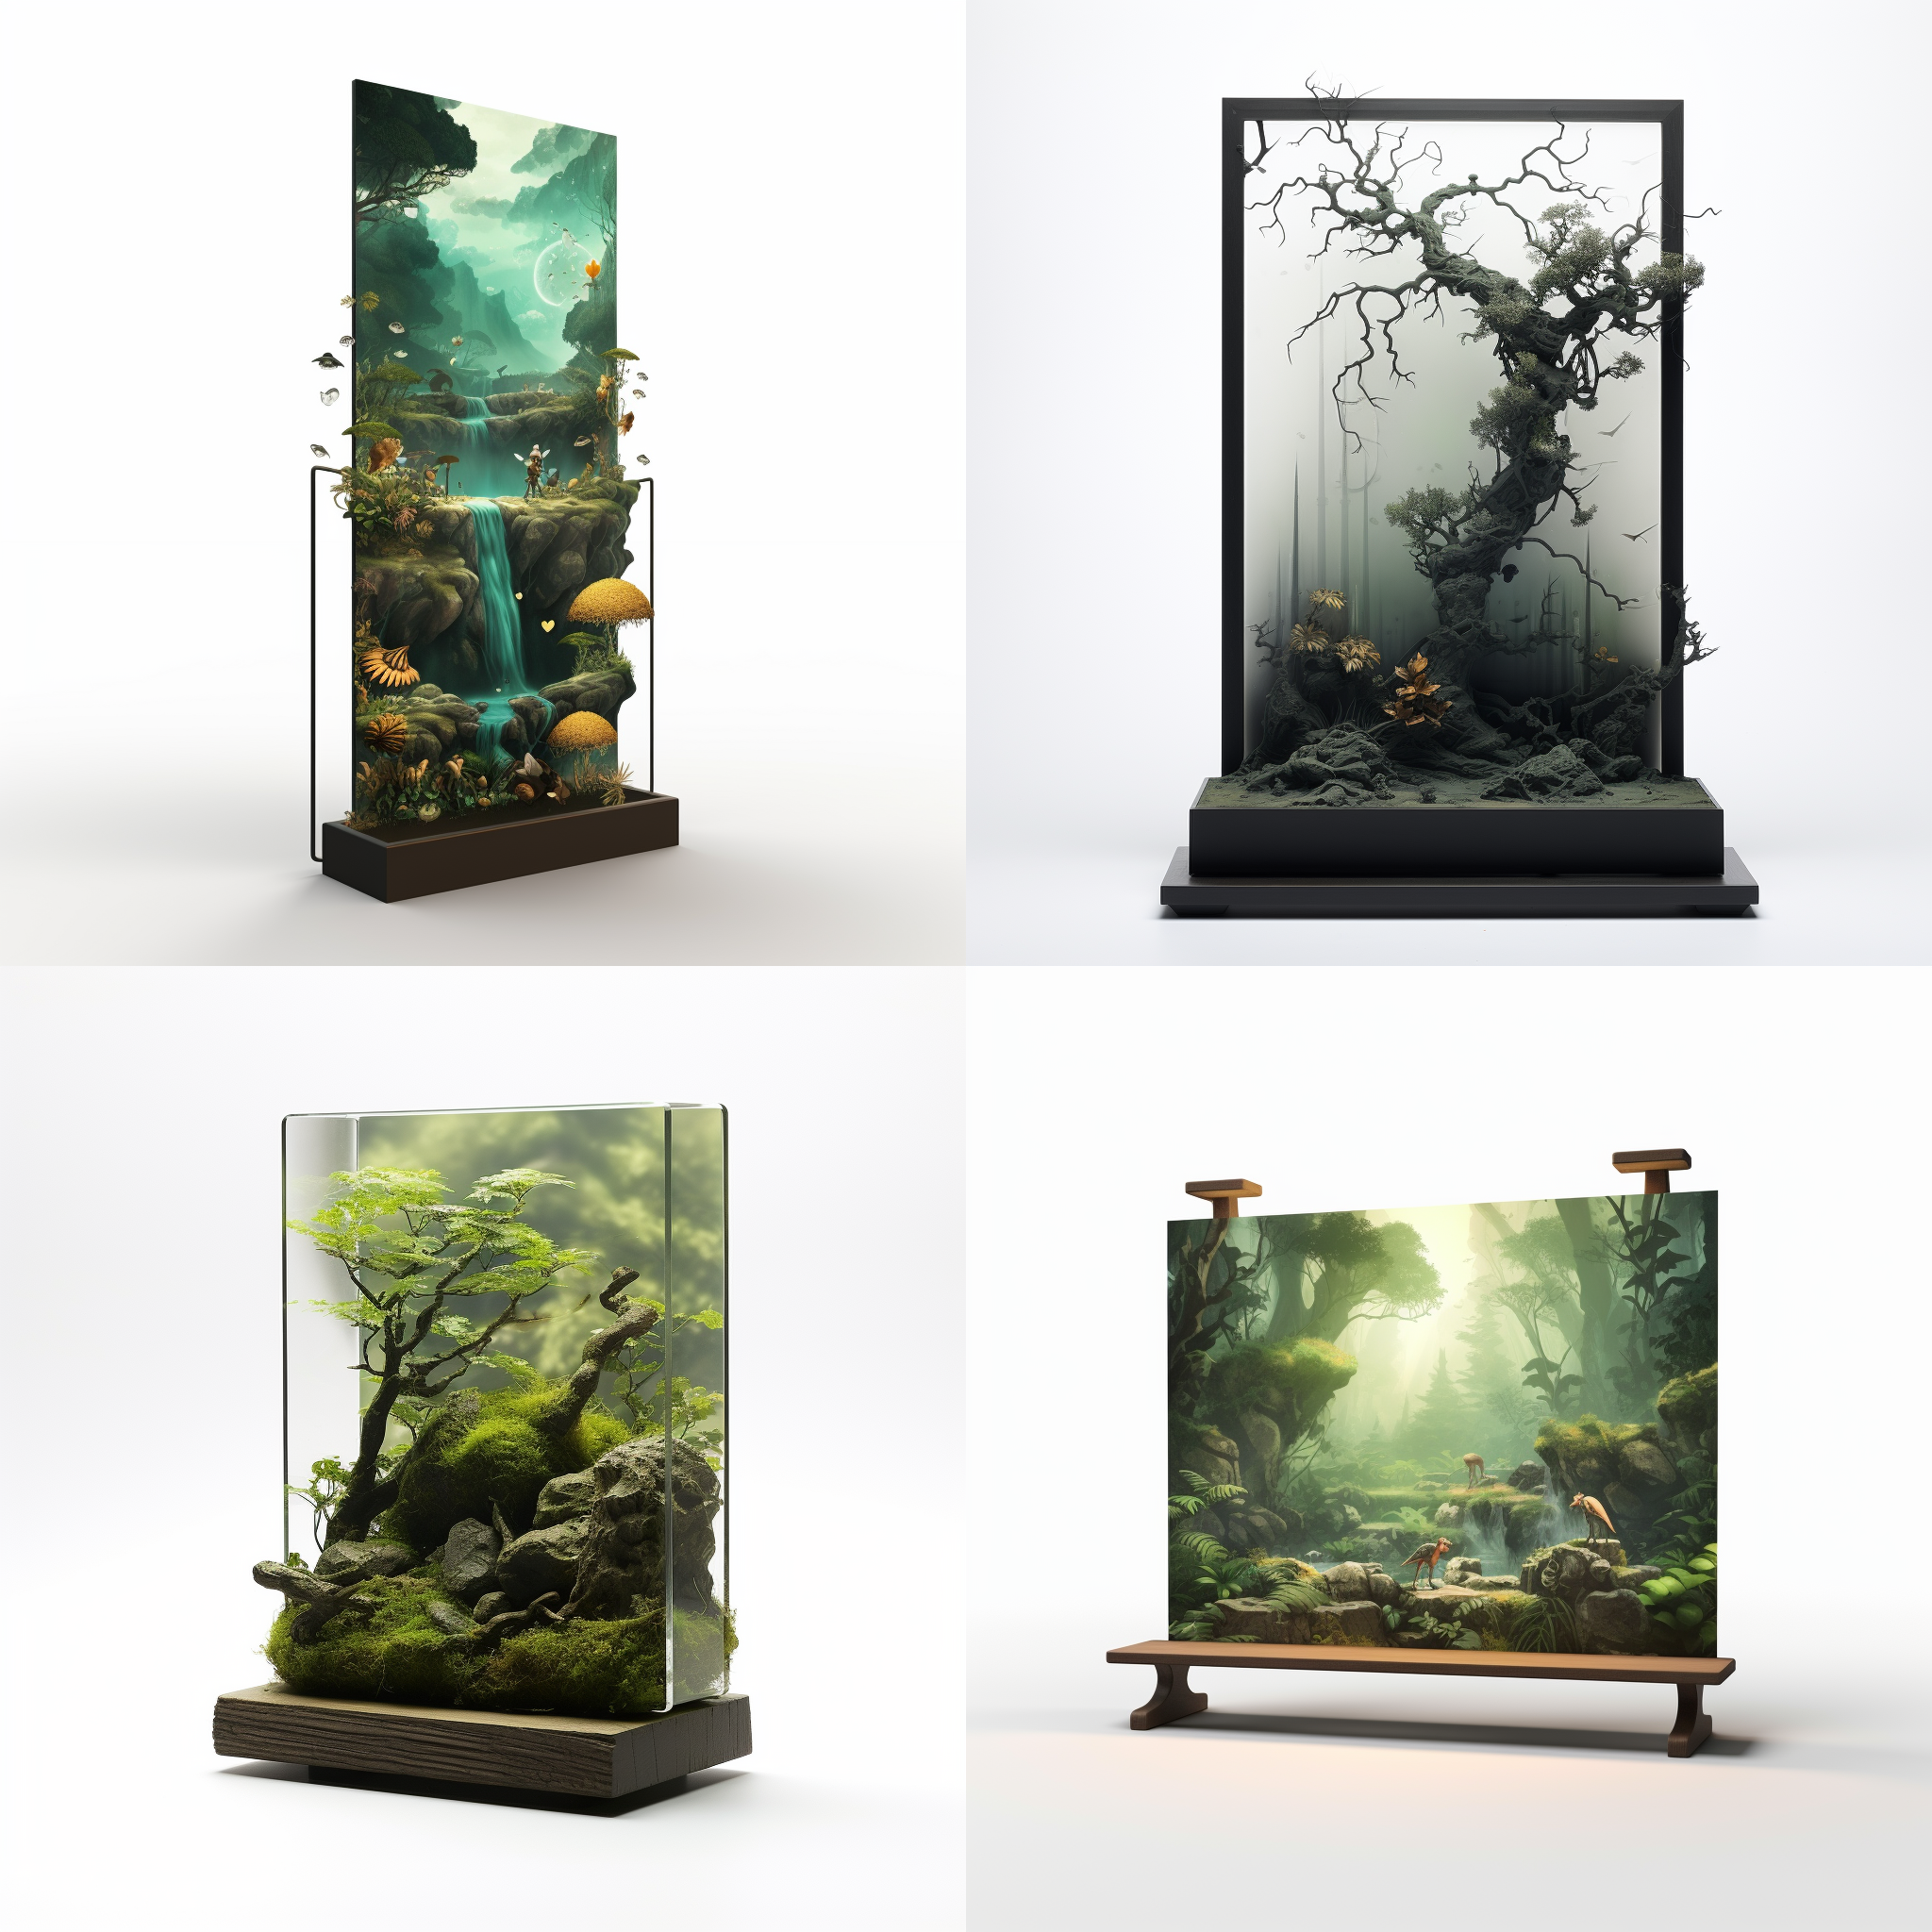 Display Stand Trends: What’s Hot in 2023?